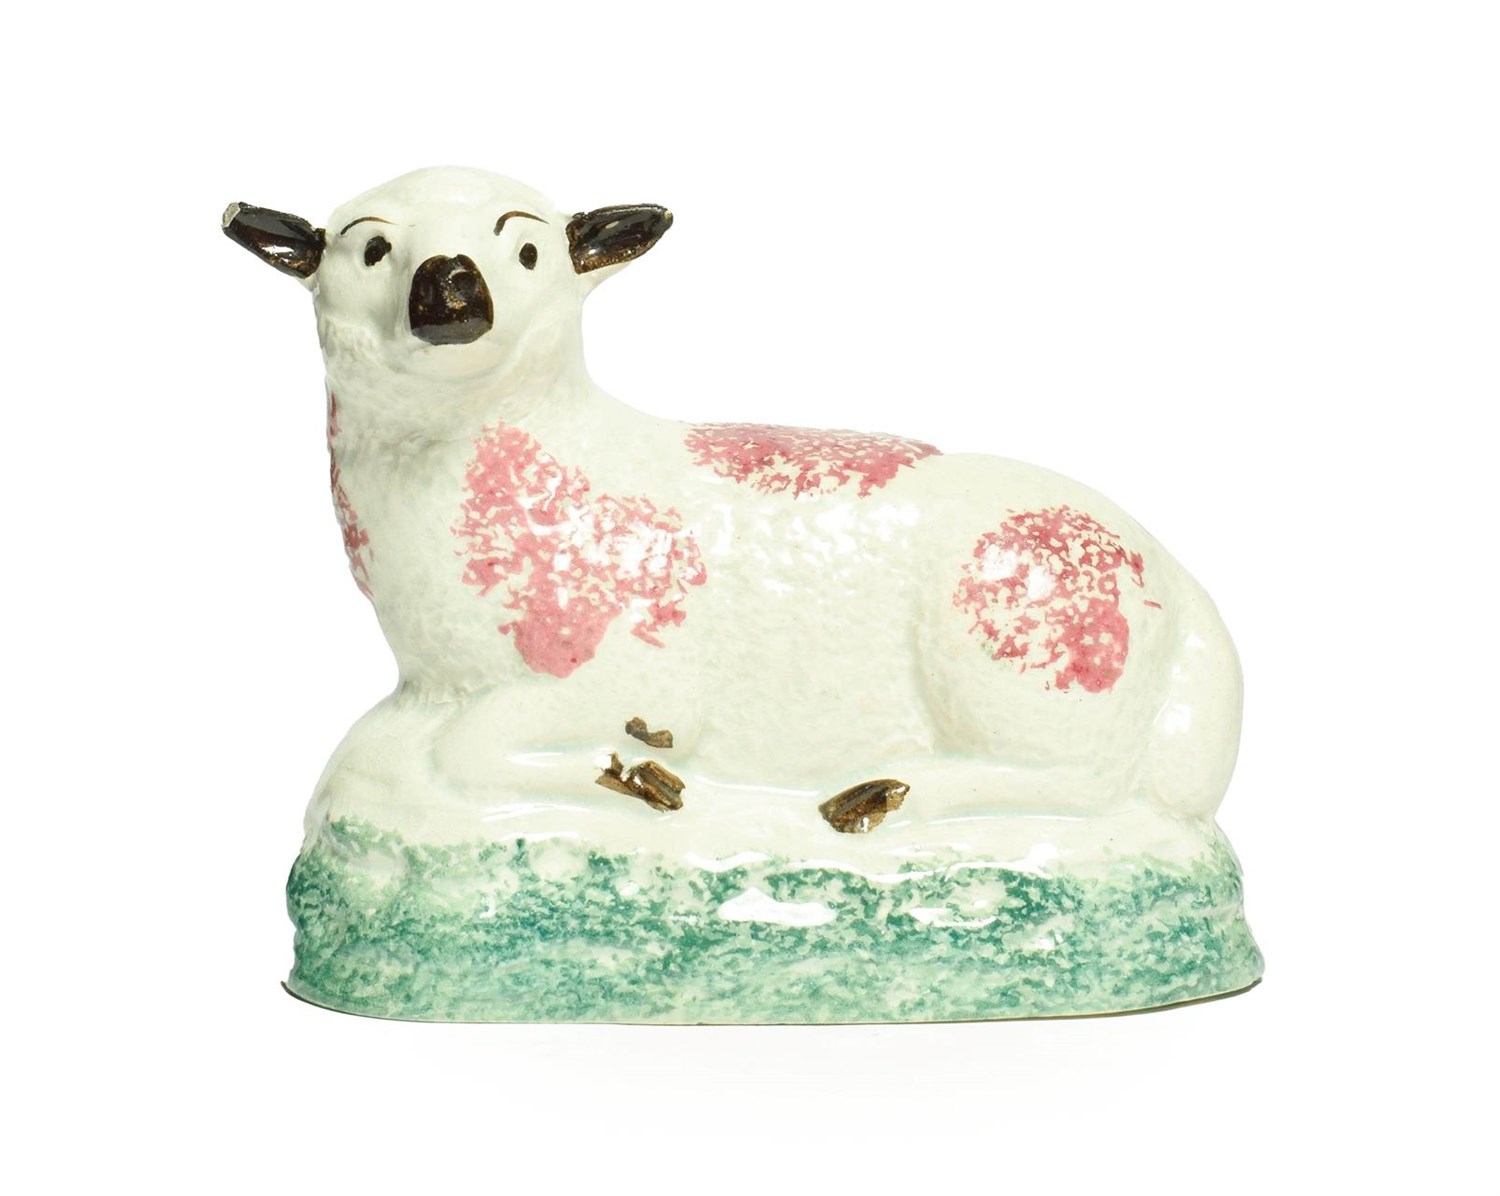 Lot 18 - A Pratt Type Figure of a Sheep, circa 1800, recumbent with puce sponged markings on a green...